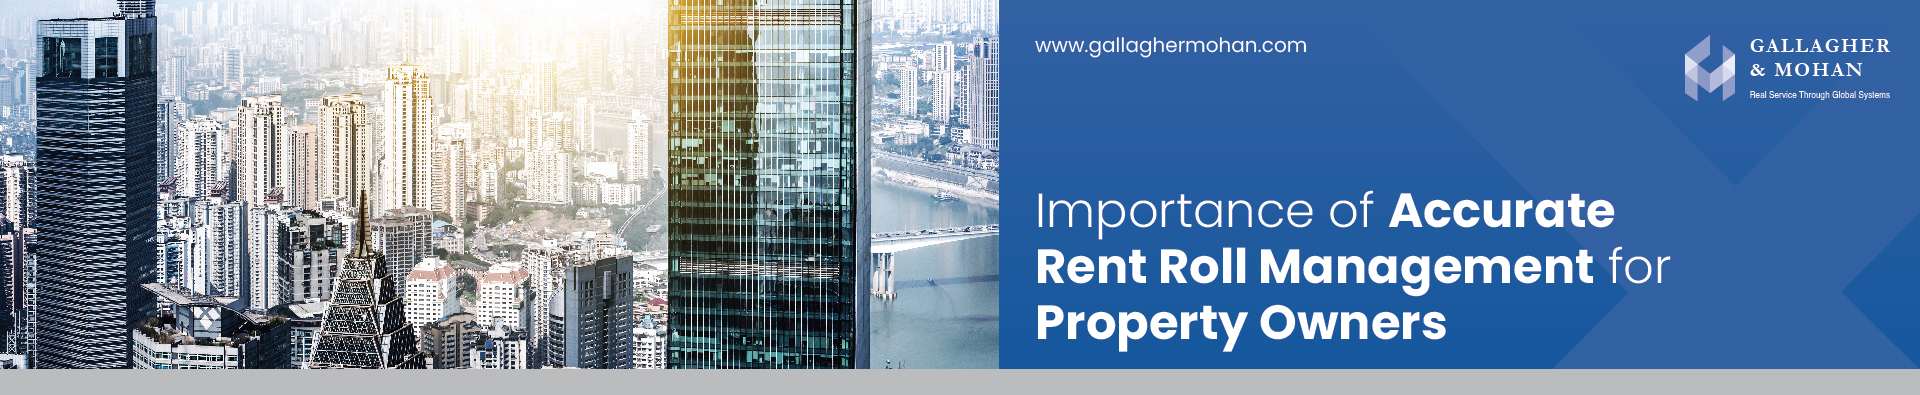 Importance Of Accurate Rent Roll Management For Property Owners